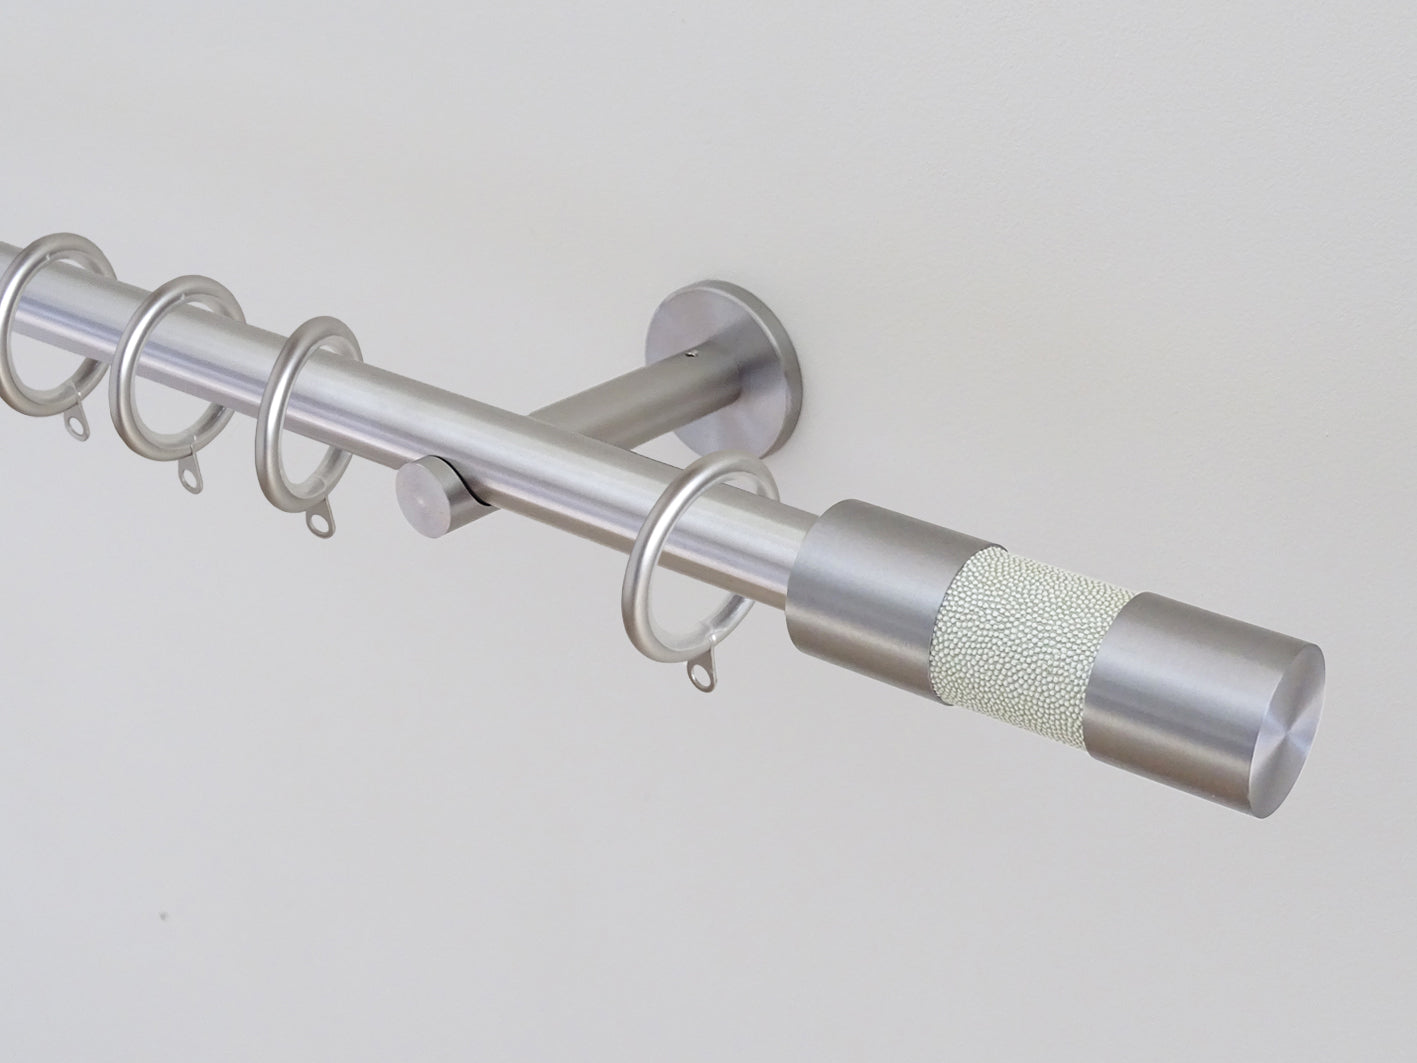 19mm diameter stainless steel curtain pole sets with steel barrel finials in white pepper